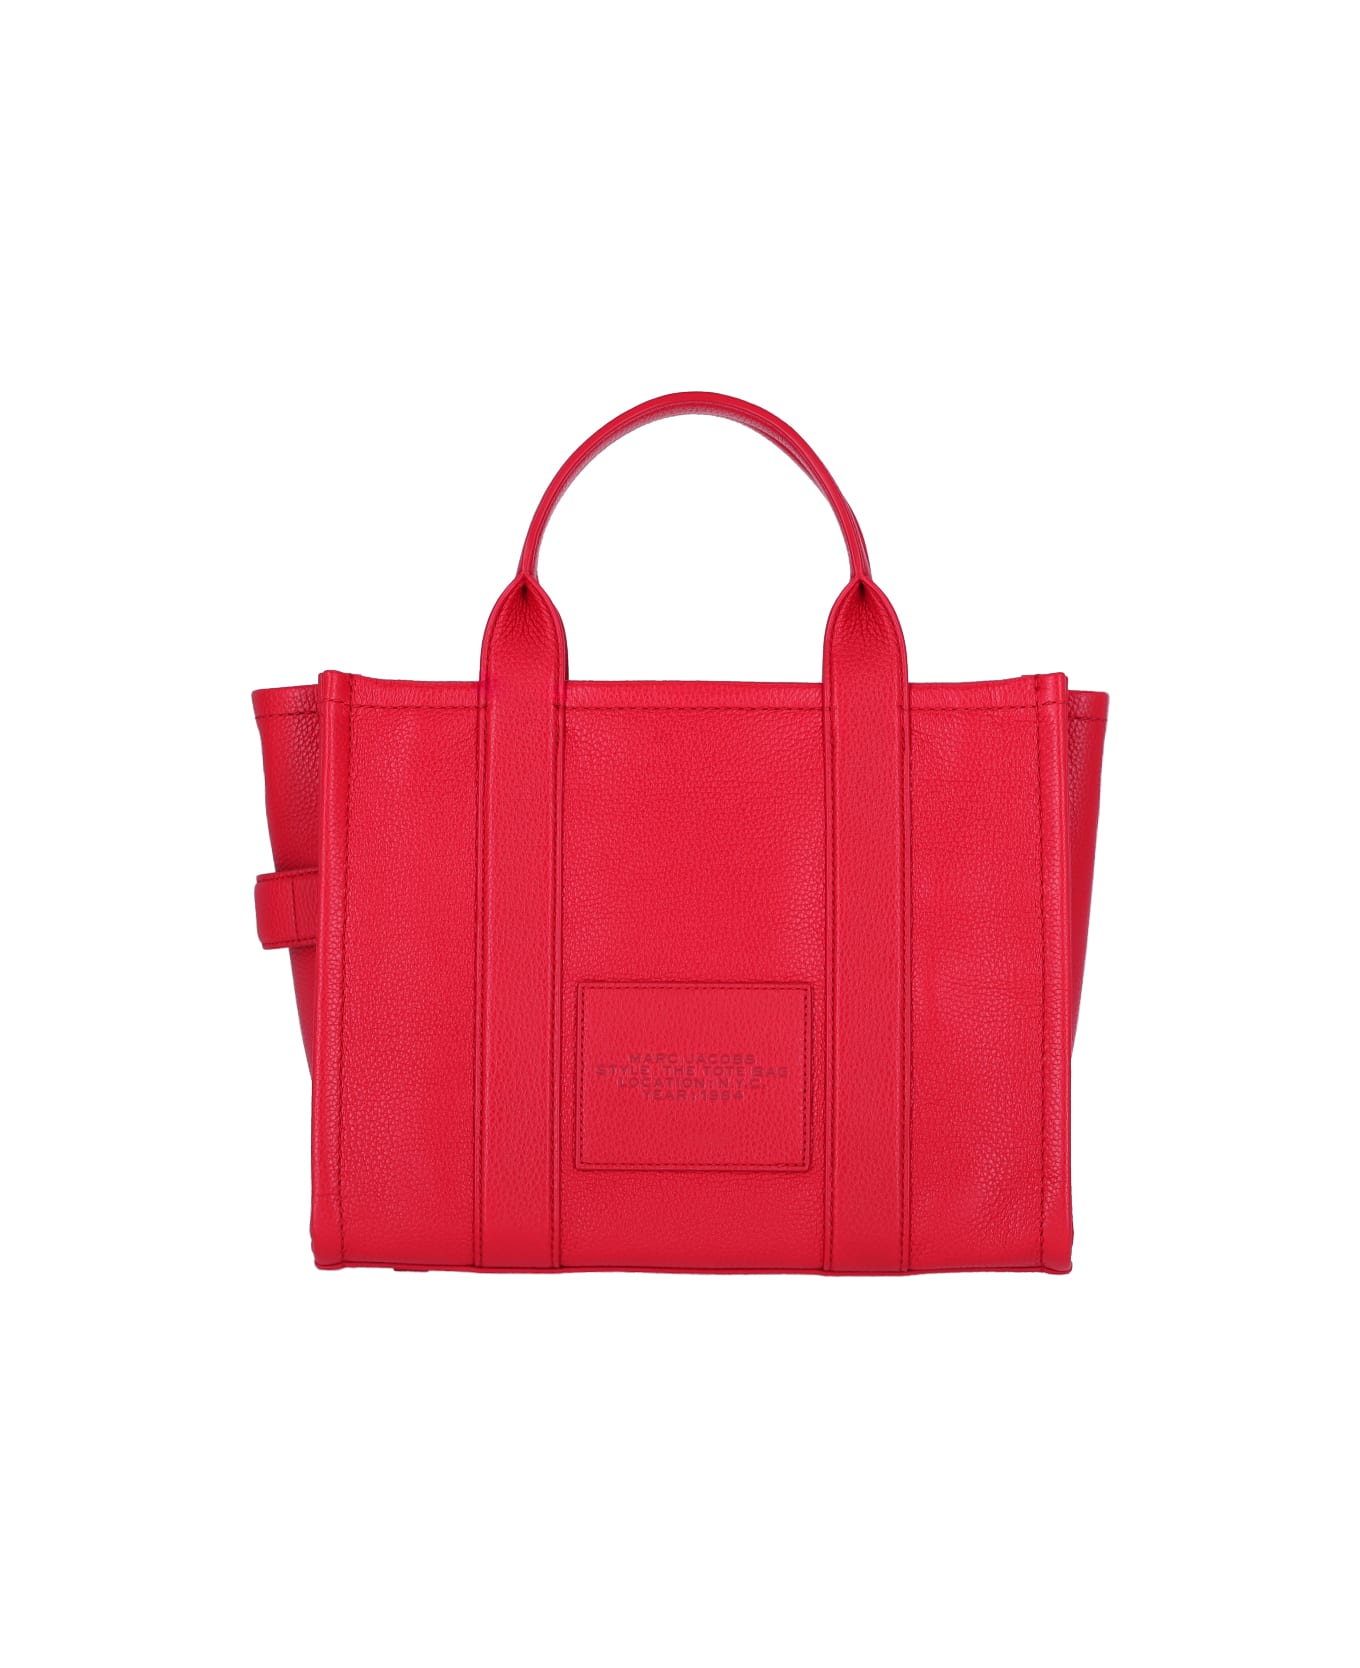 Marc Jacobs "the Medium Tote" Bag - Red